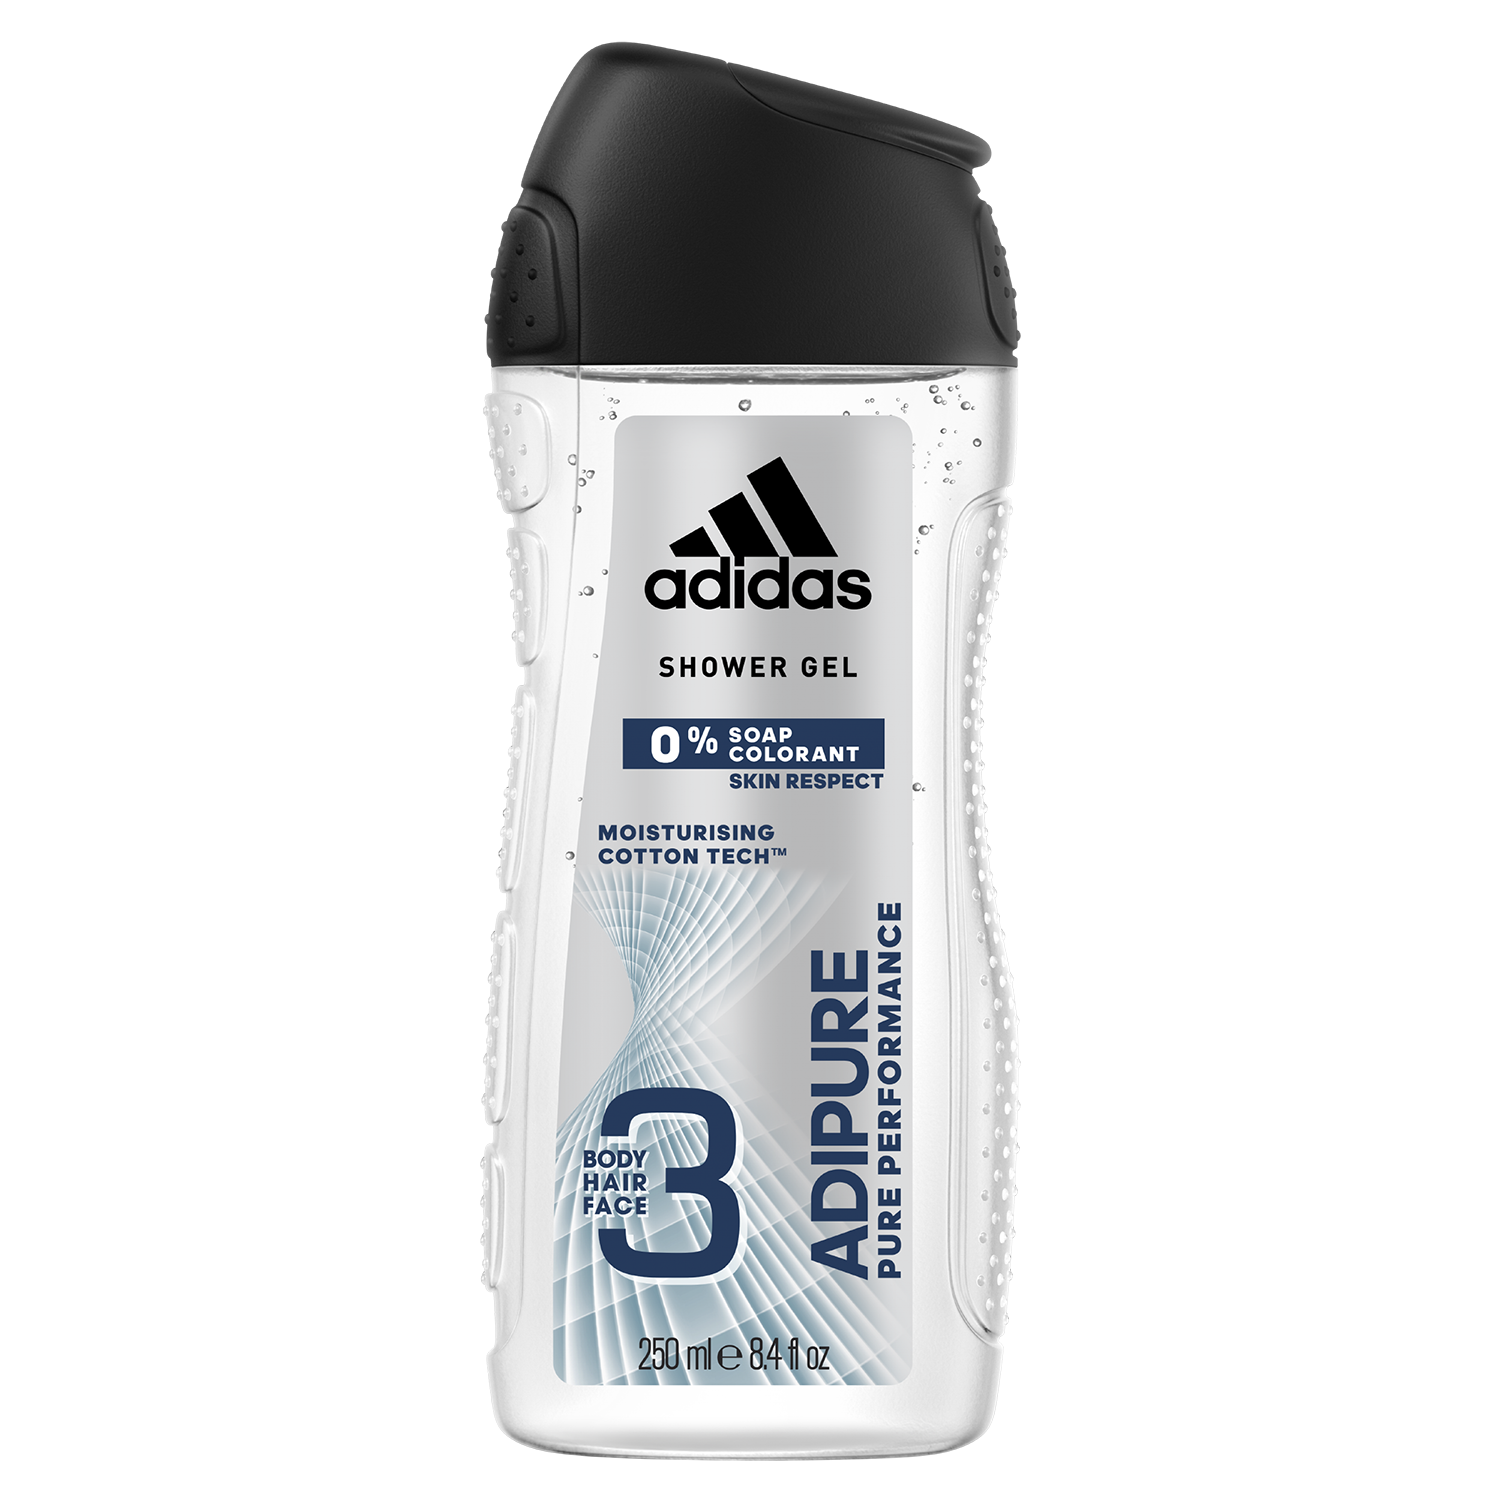 Adidas 3 in 1 Shower Gel For Body Hair Face Adipure 250ml | Lazada Singapore